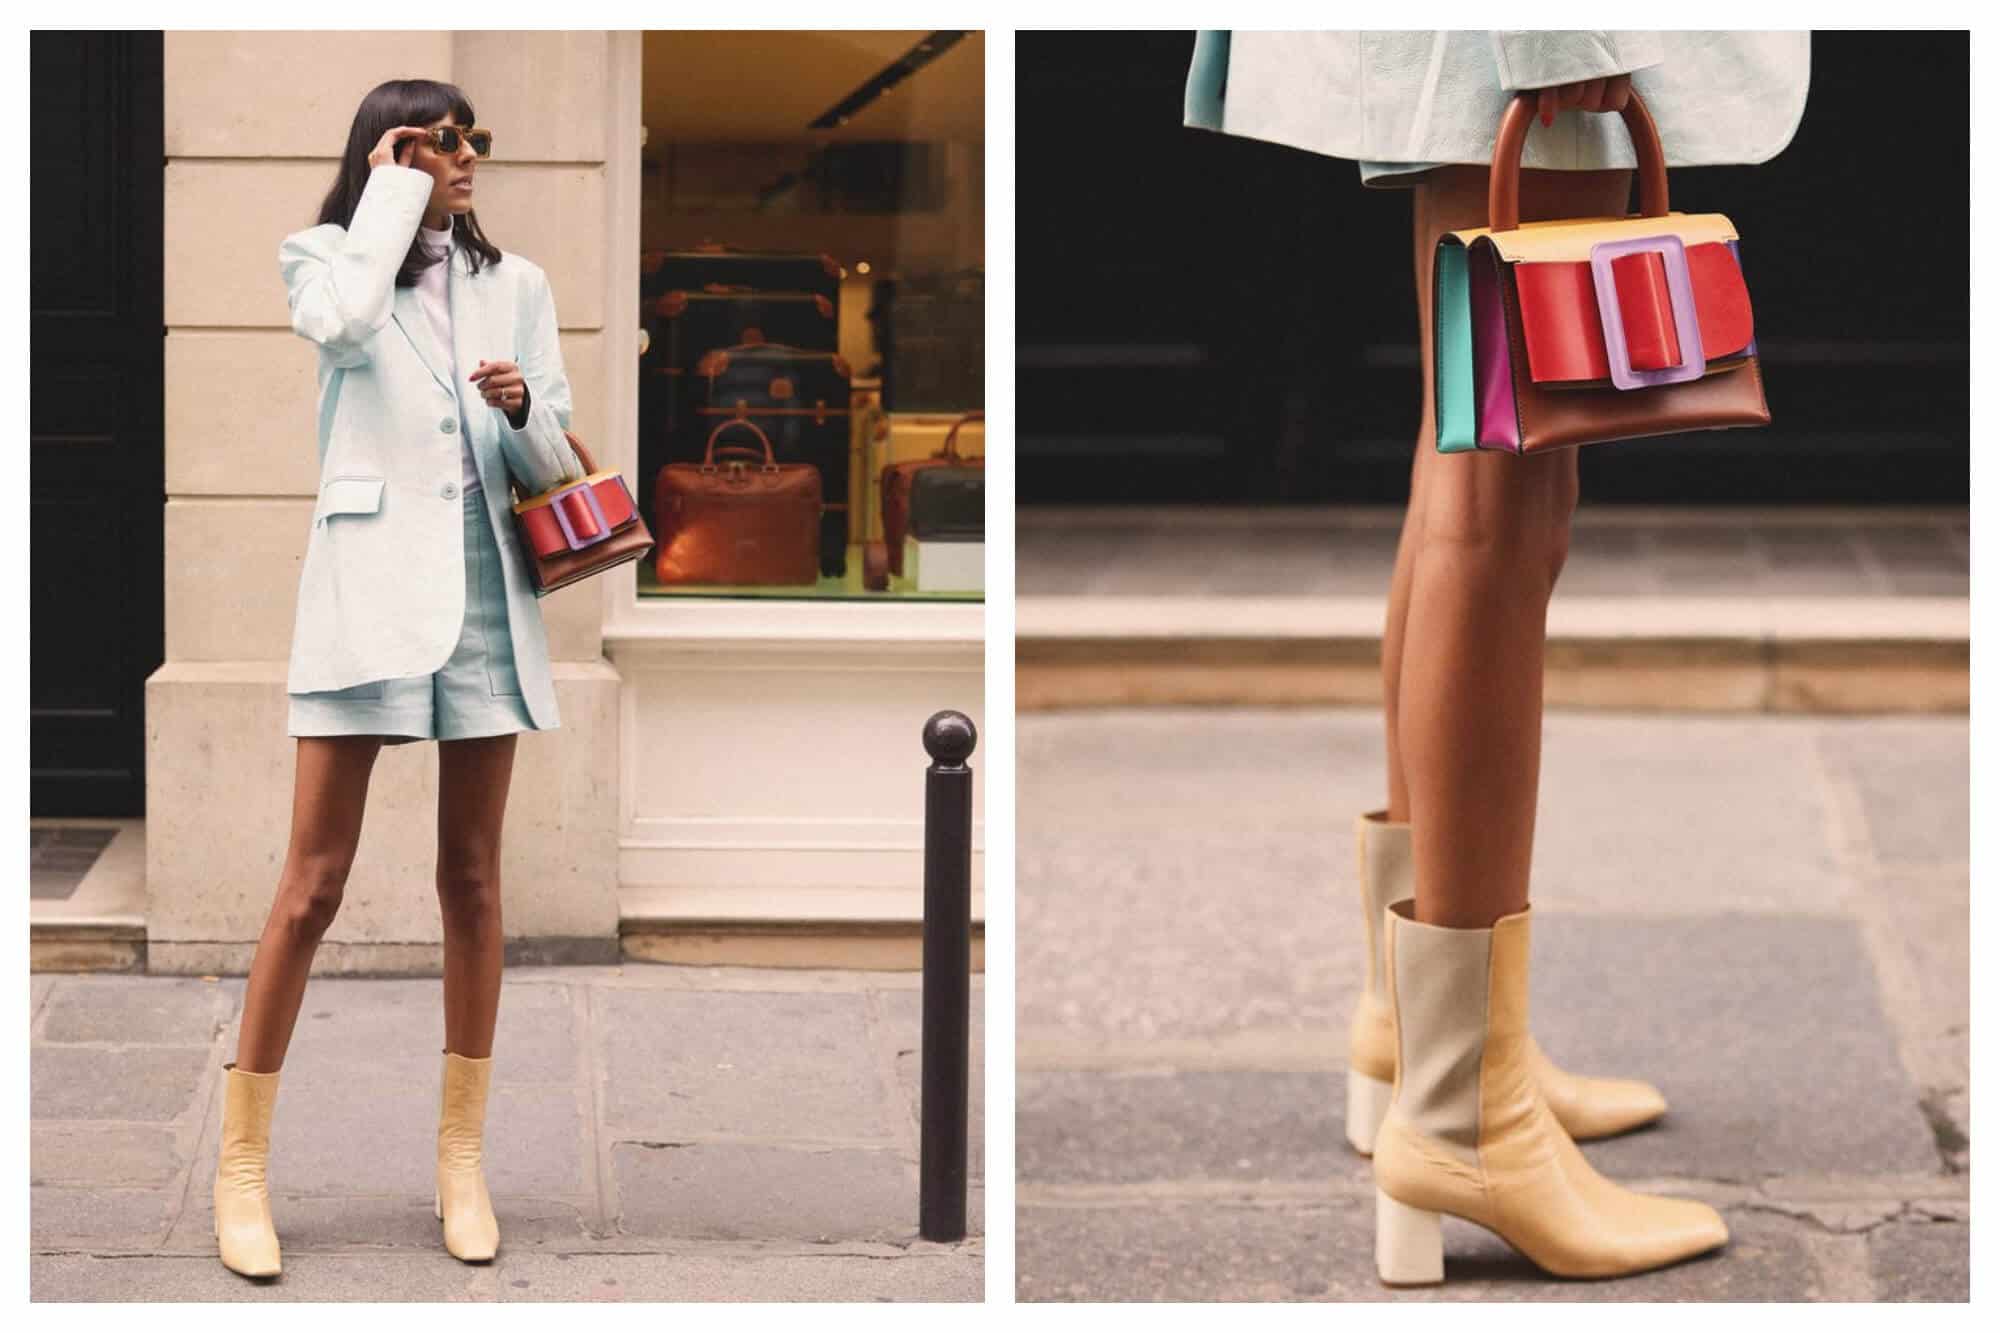 Left: a woman standing on a Parisian footpath in front of a shop window. She's wearing a pale blue blazer and matching shorts, with sunglasses, a multicolour handbag, and tan heeled boots. Right: a close up of the same woman's legs with the handbag and boots.